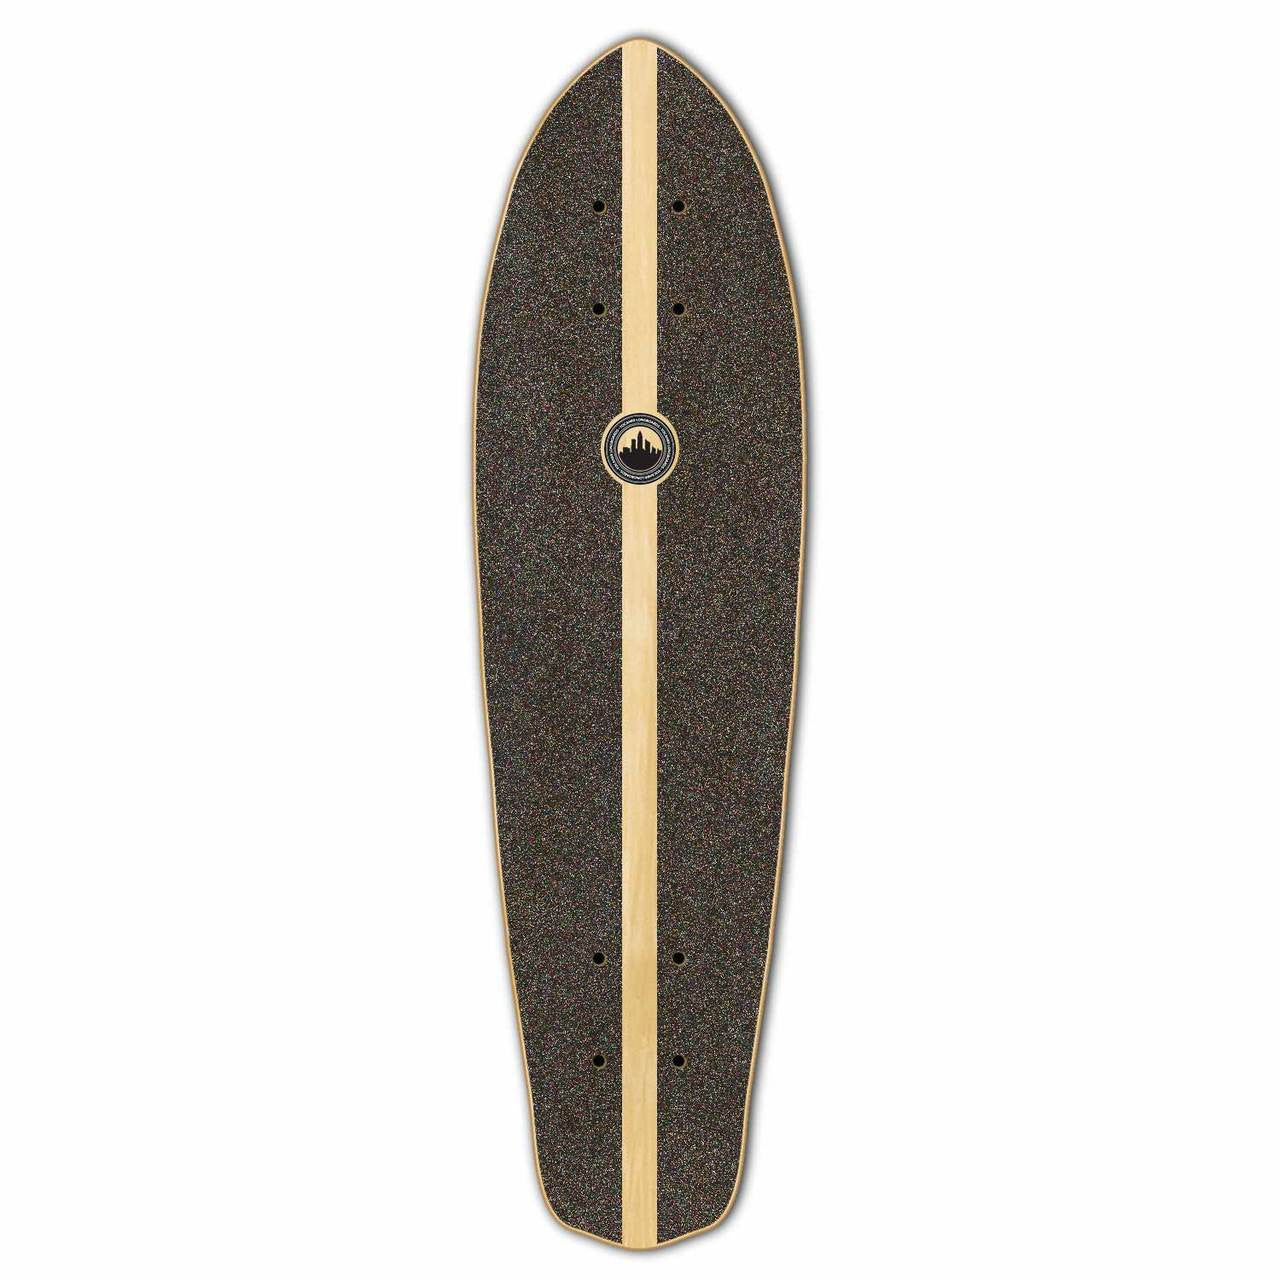 Yocaher Micro Cruiser Blank  Deck - Stained Blue